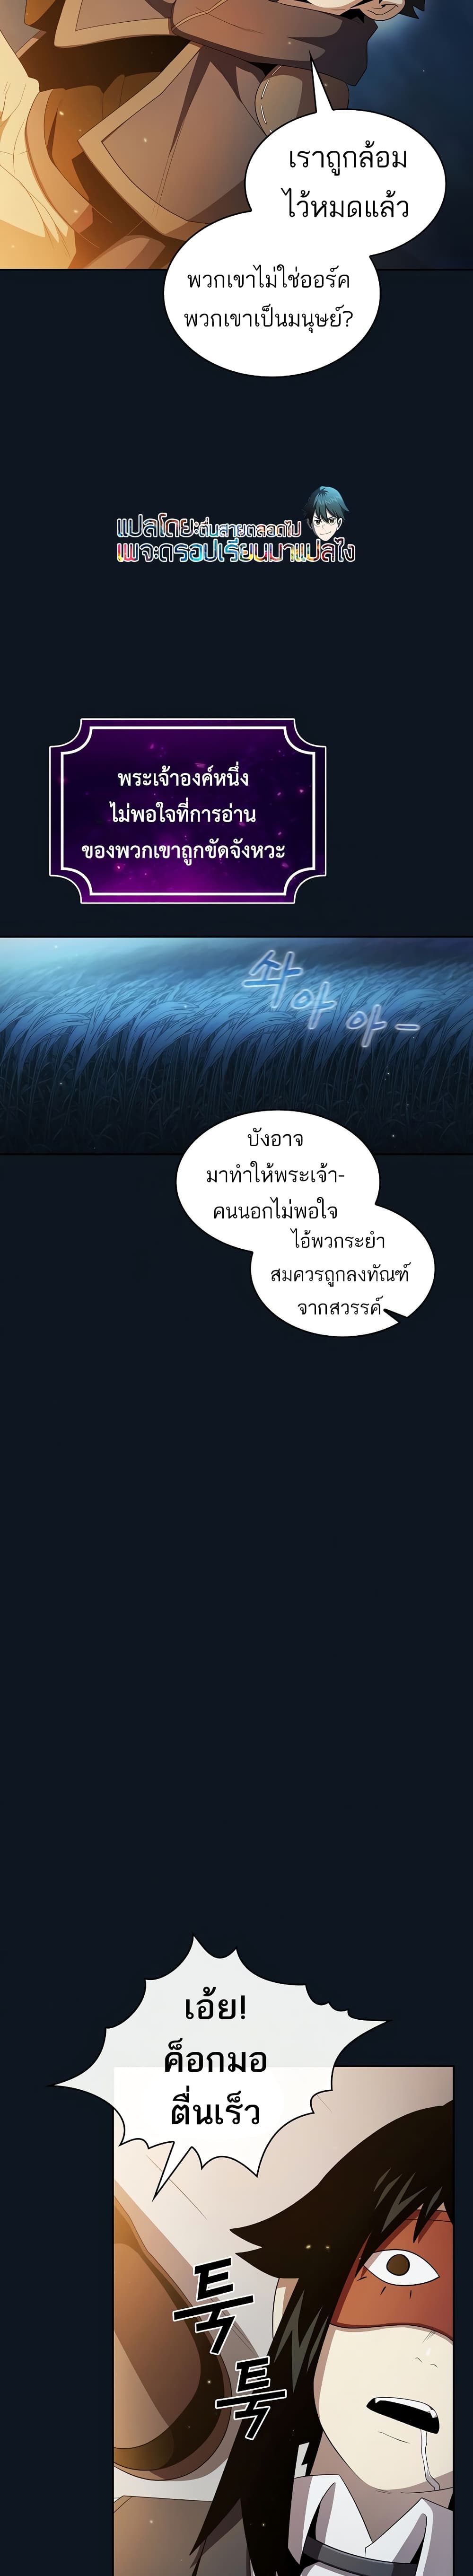 Is This Hero for Real à¸à¸­à¸à¸à¸µà¹ 33 (19)